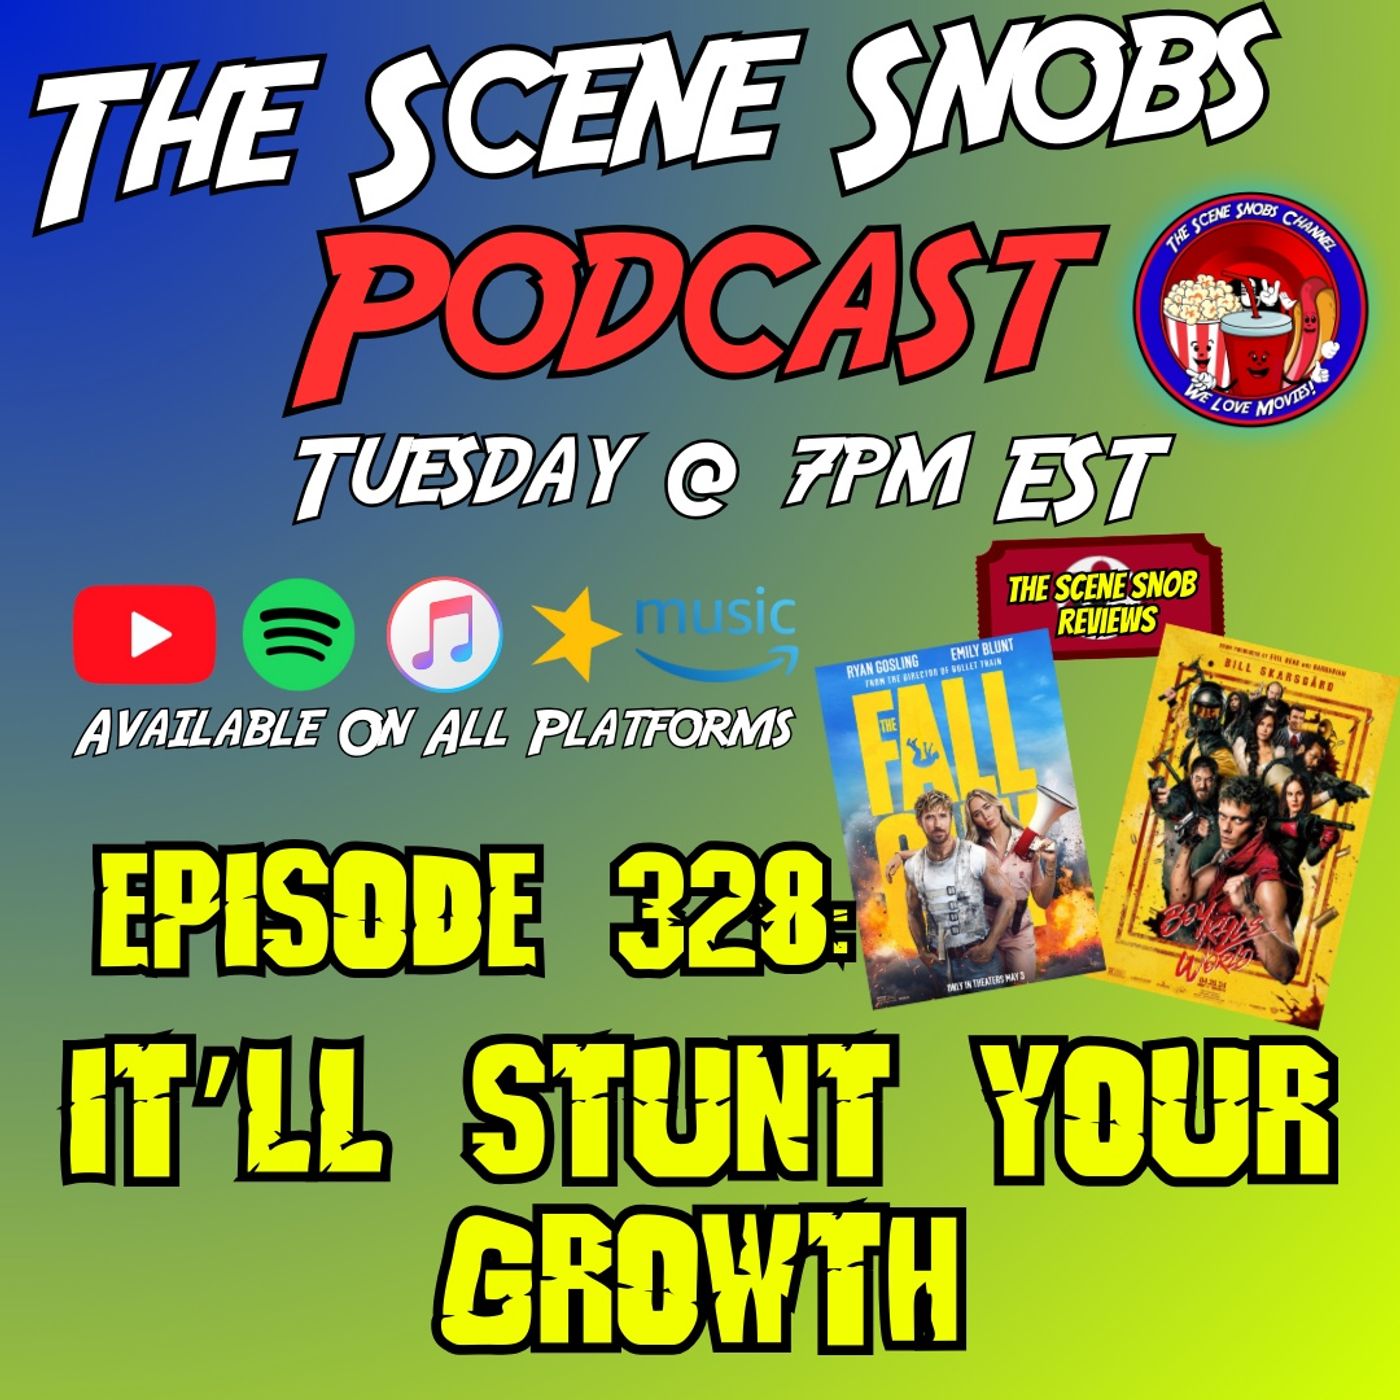 The Scene Snobs Podcast – It’ll Stunt Your Growth